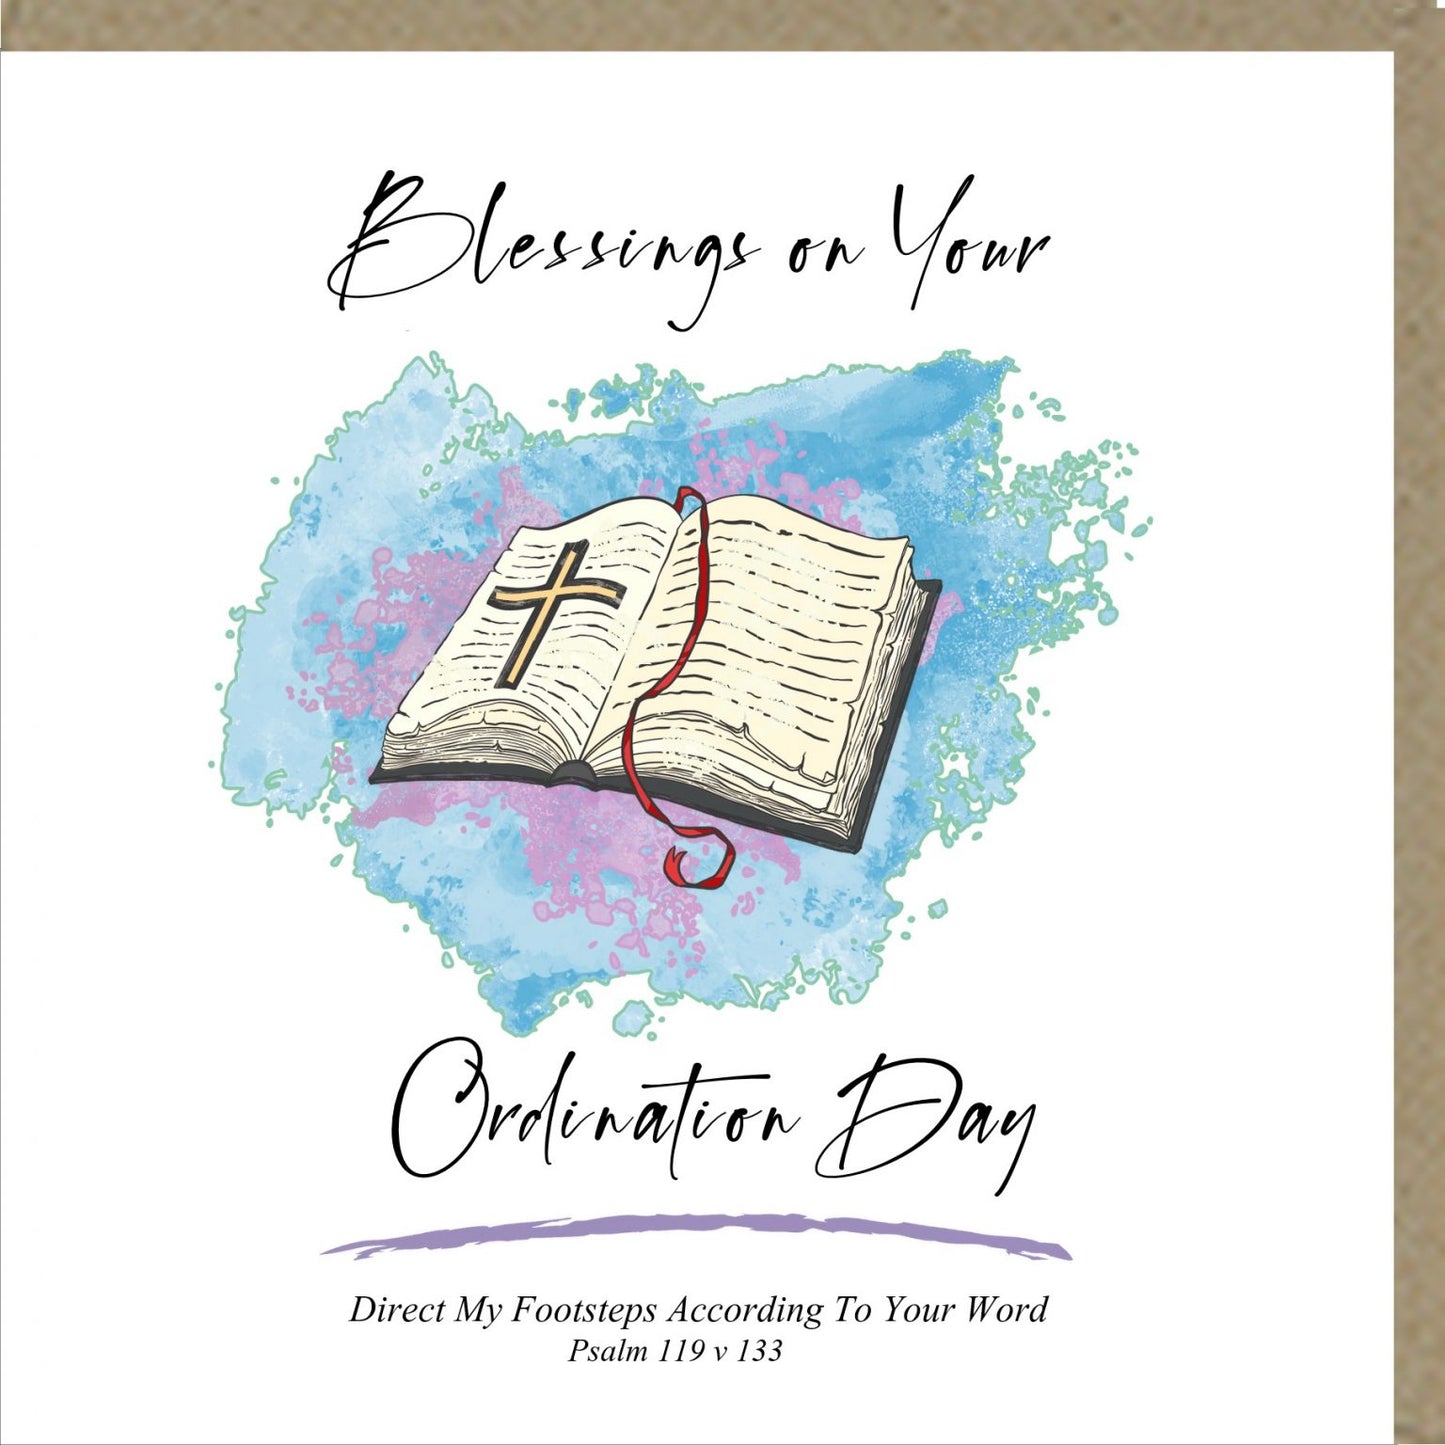 Blessings On Your Ordination Day Greetings Card - The Christian Gift Company